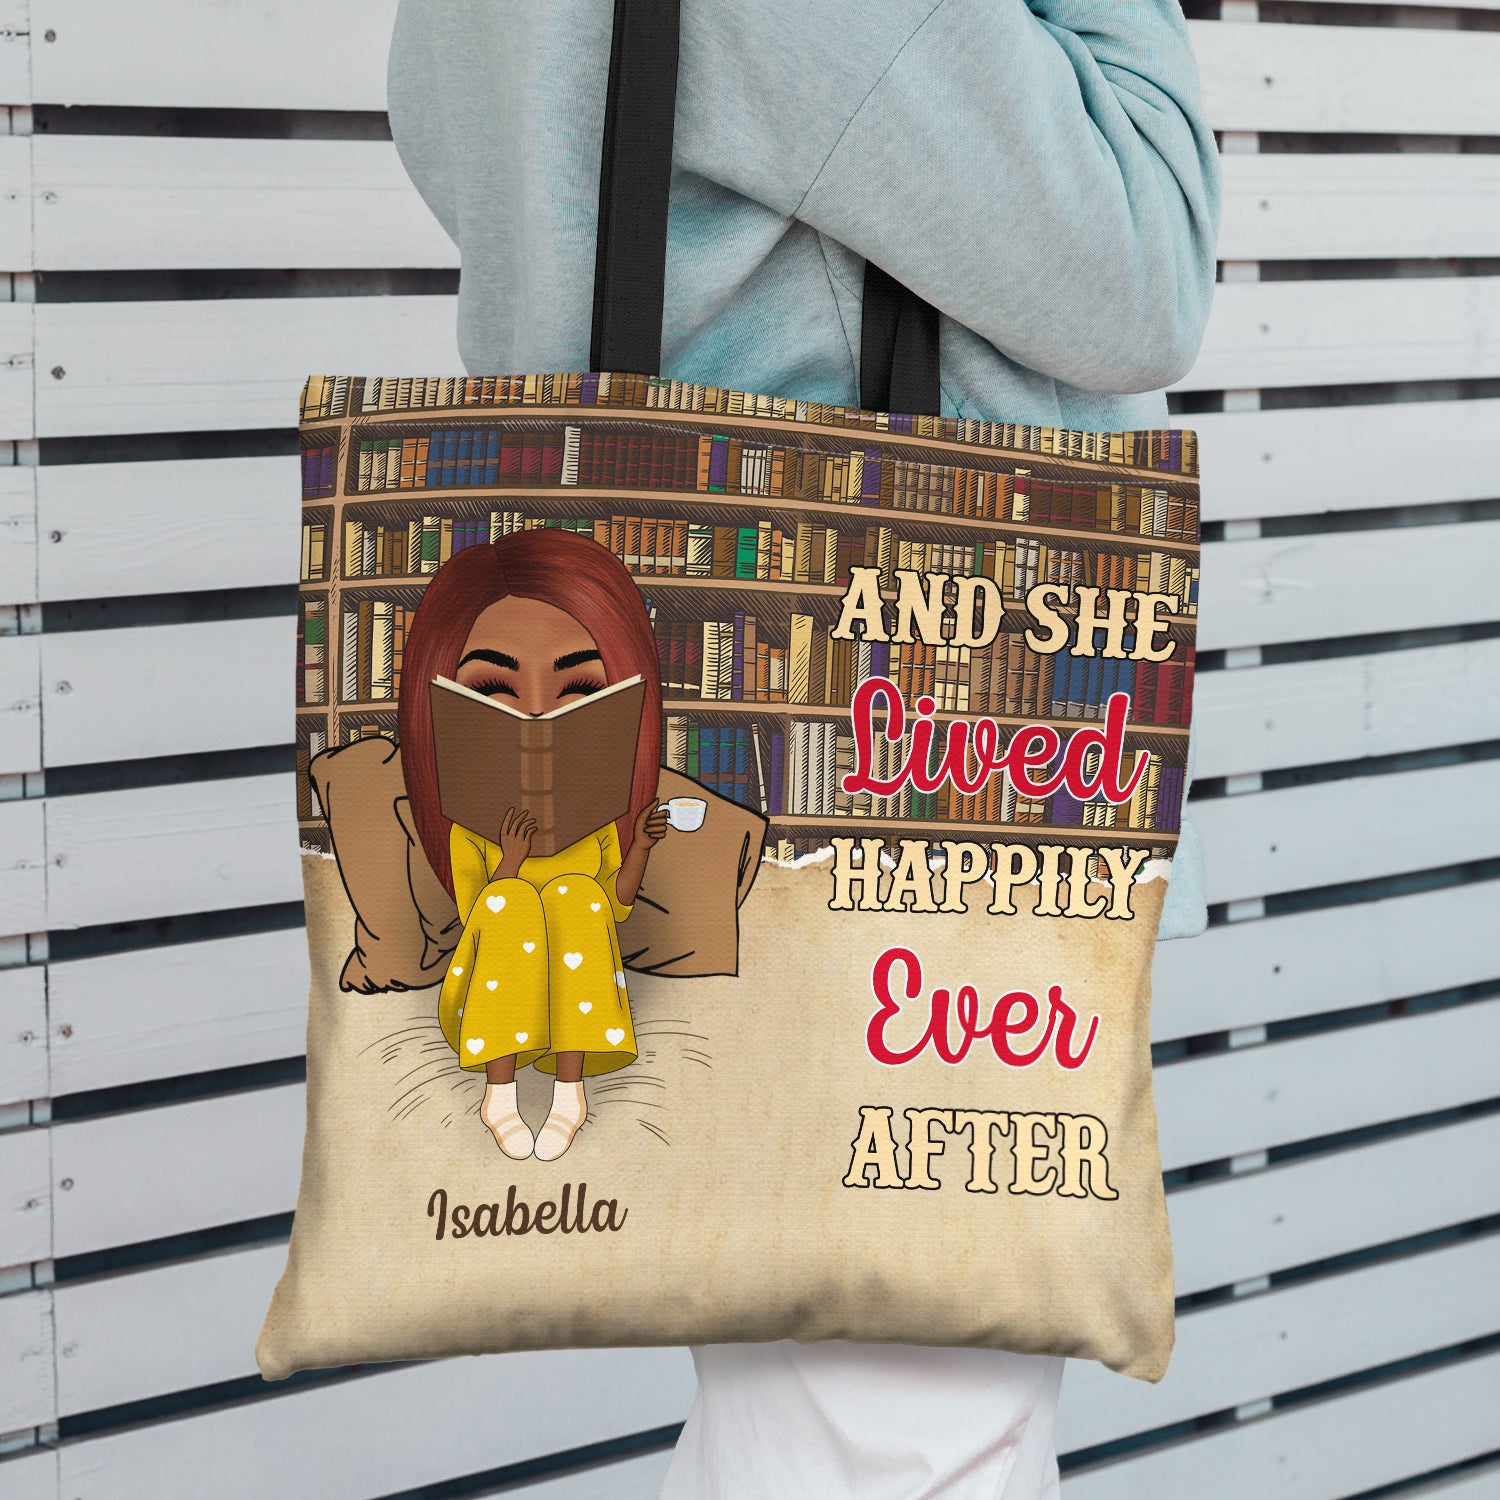 Literary gifts for booklovers. Handbags that look real books